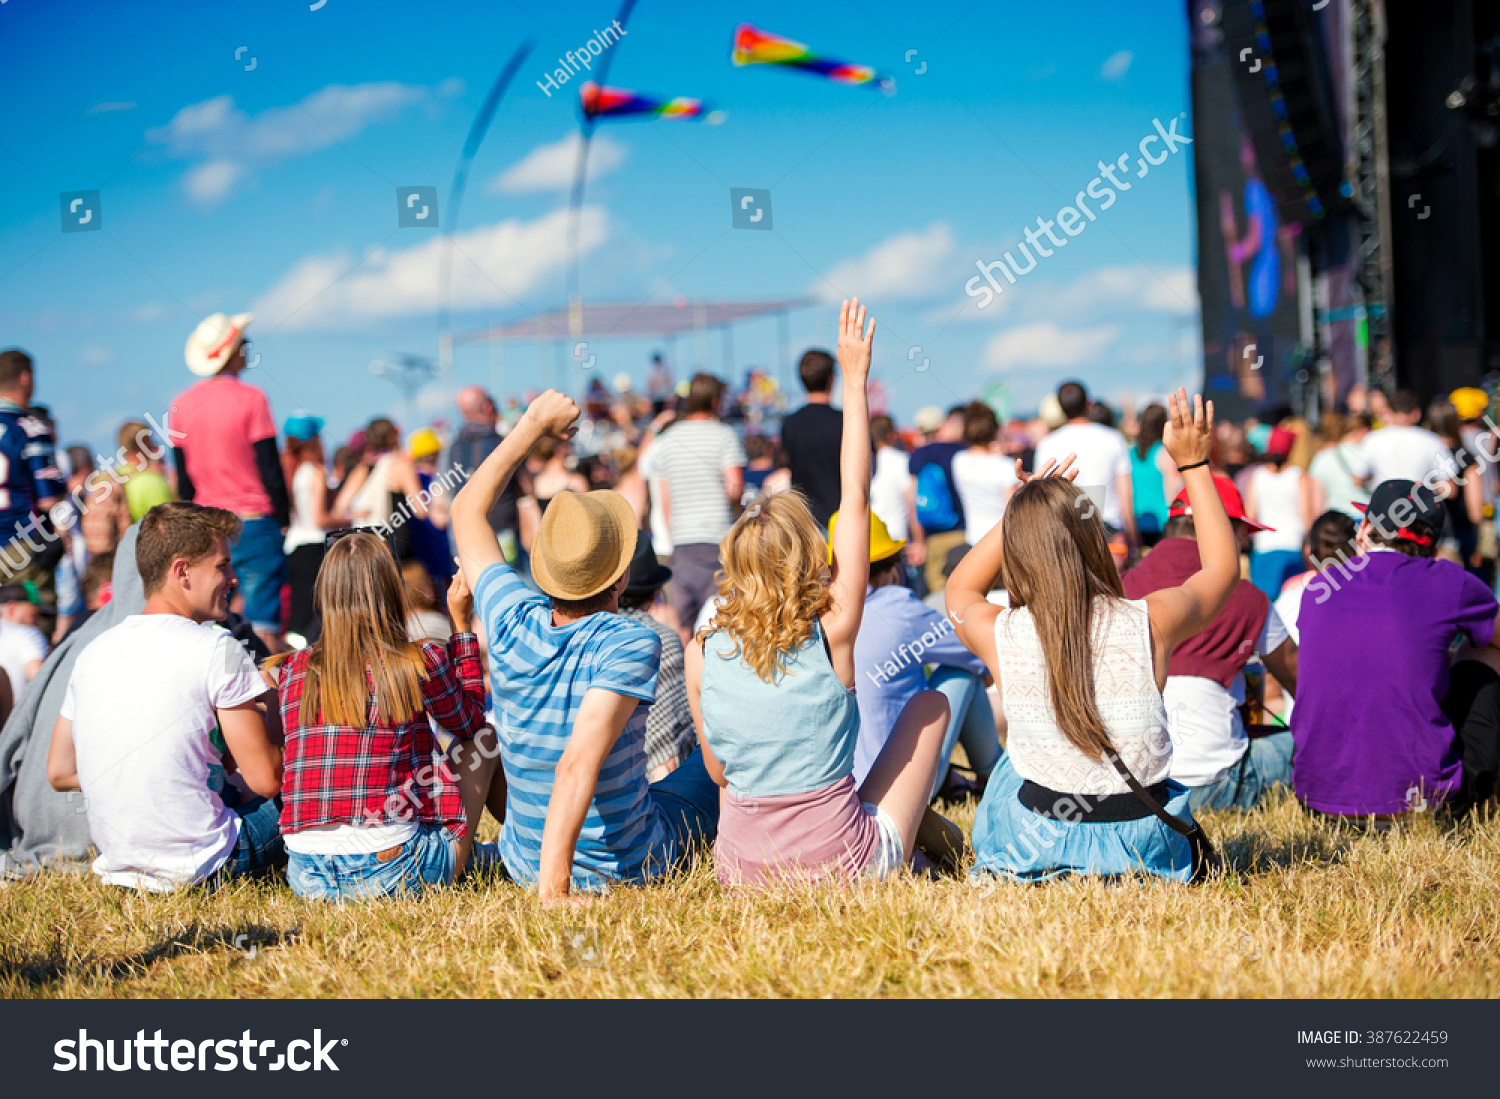 Teenagers, summer music festival, sitting in front of stage #387622459